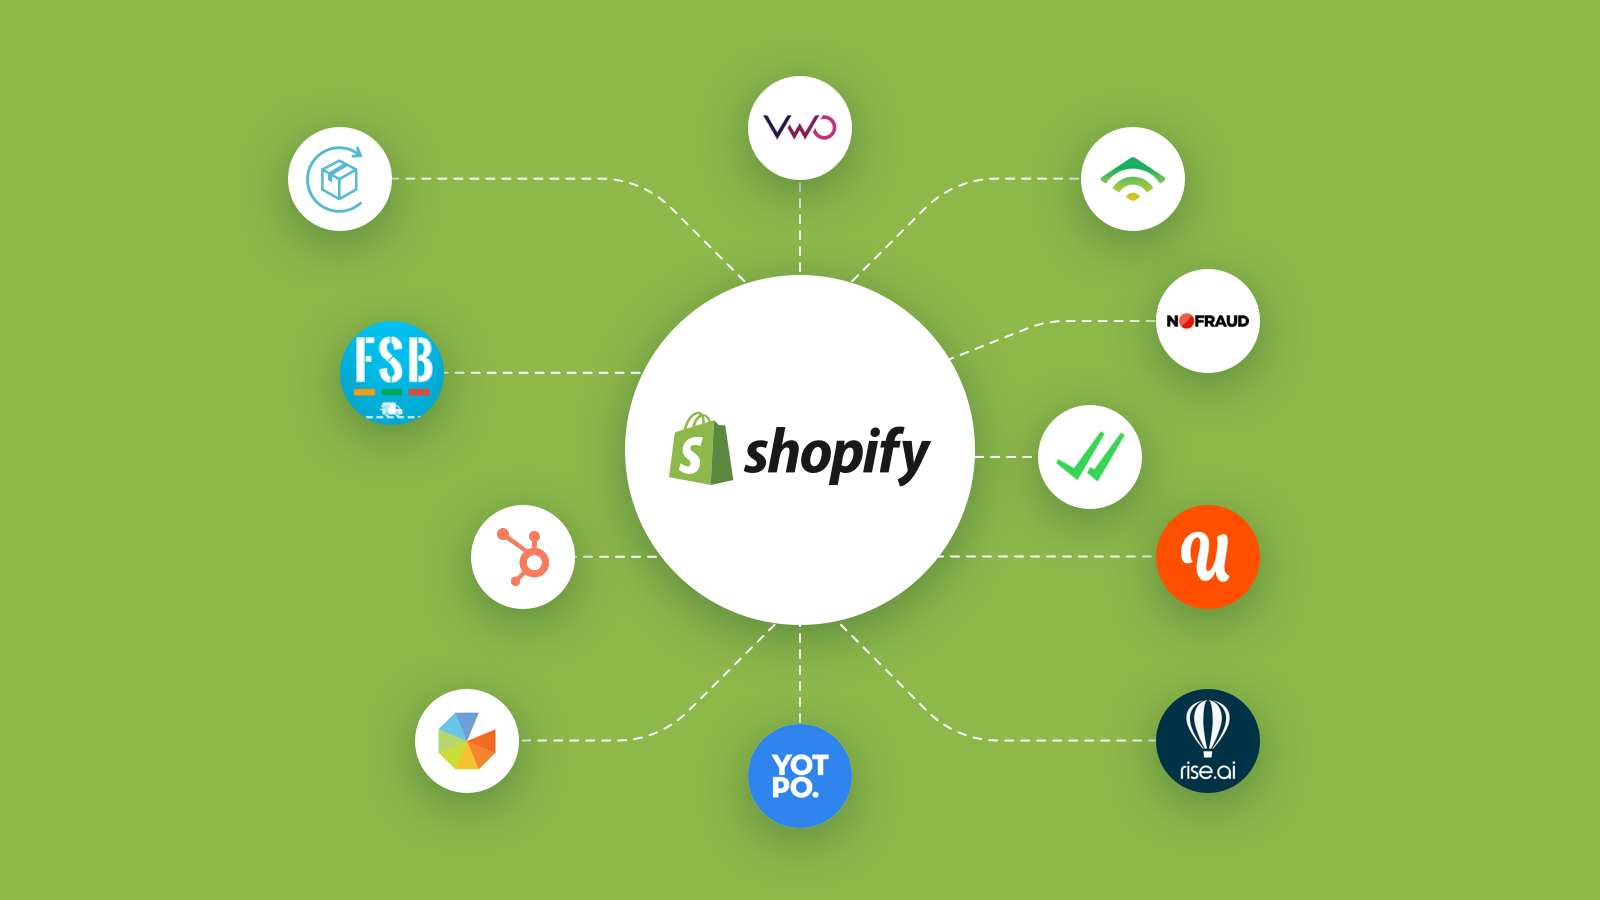 Top 10 Estimated delivery date Shopify apps for all time